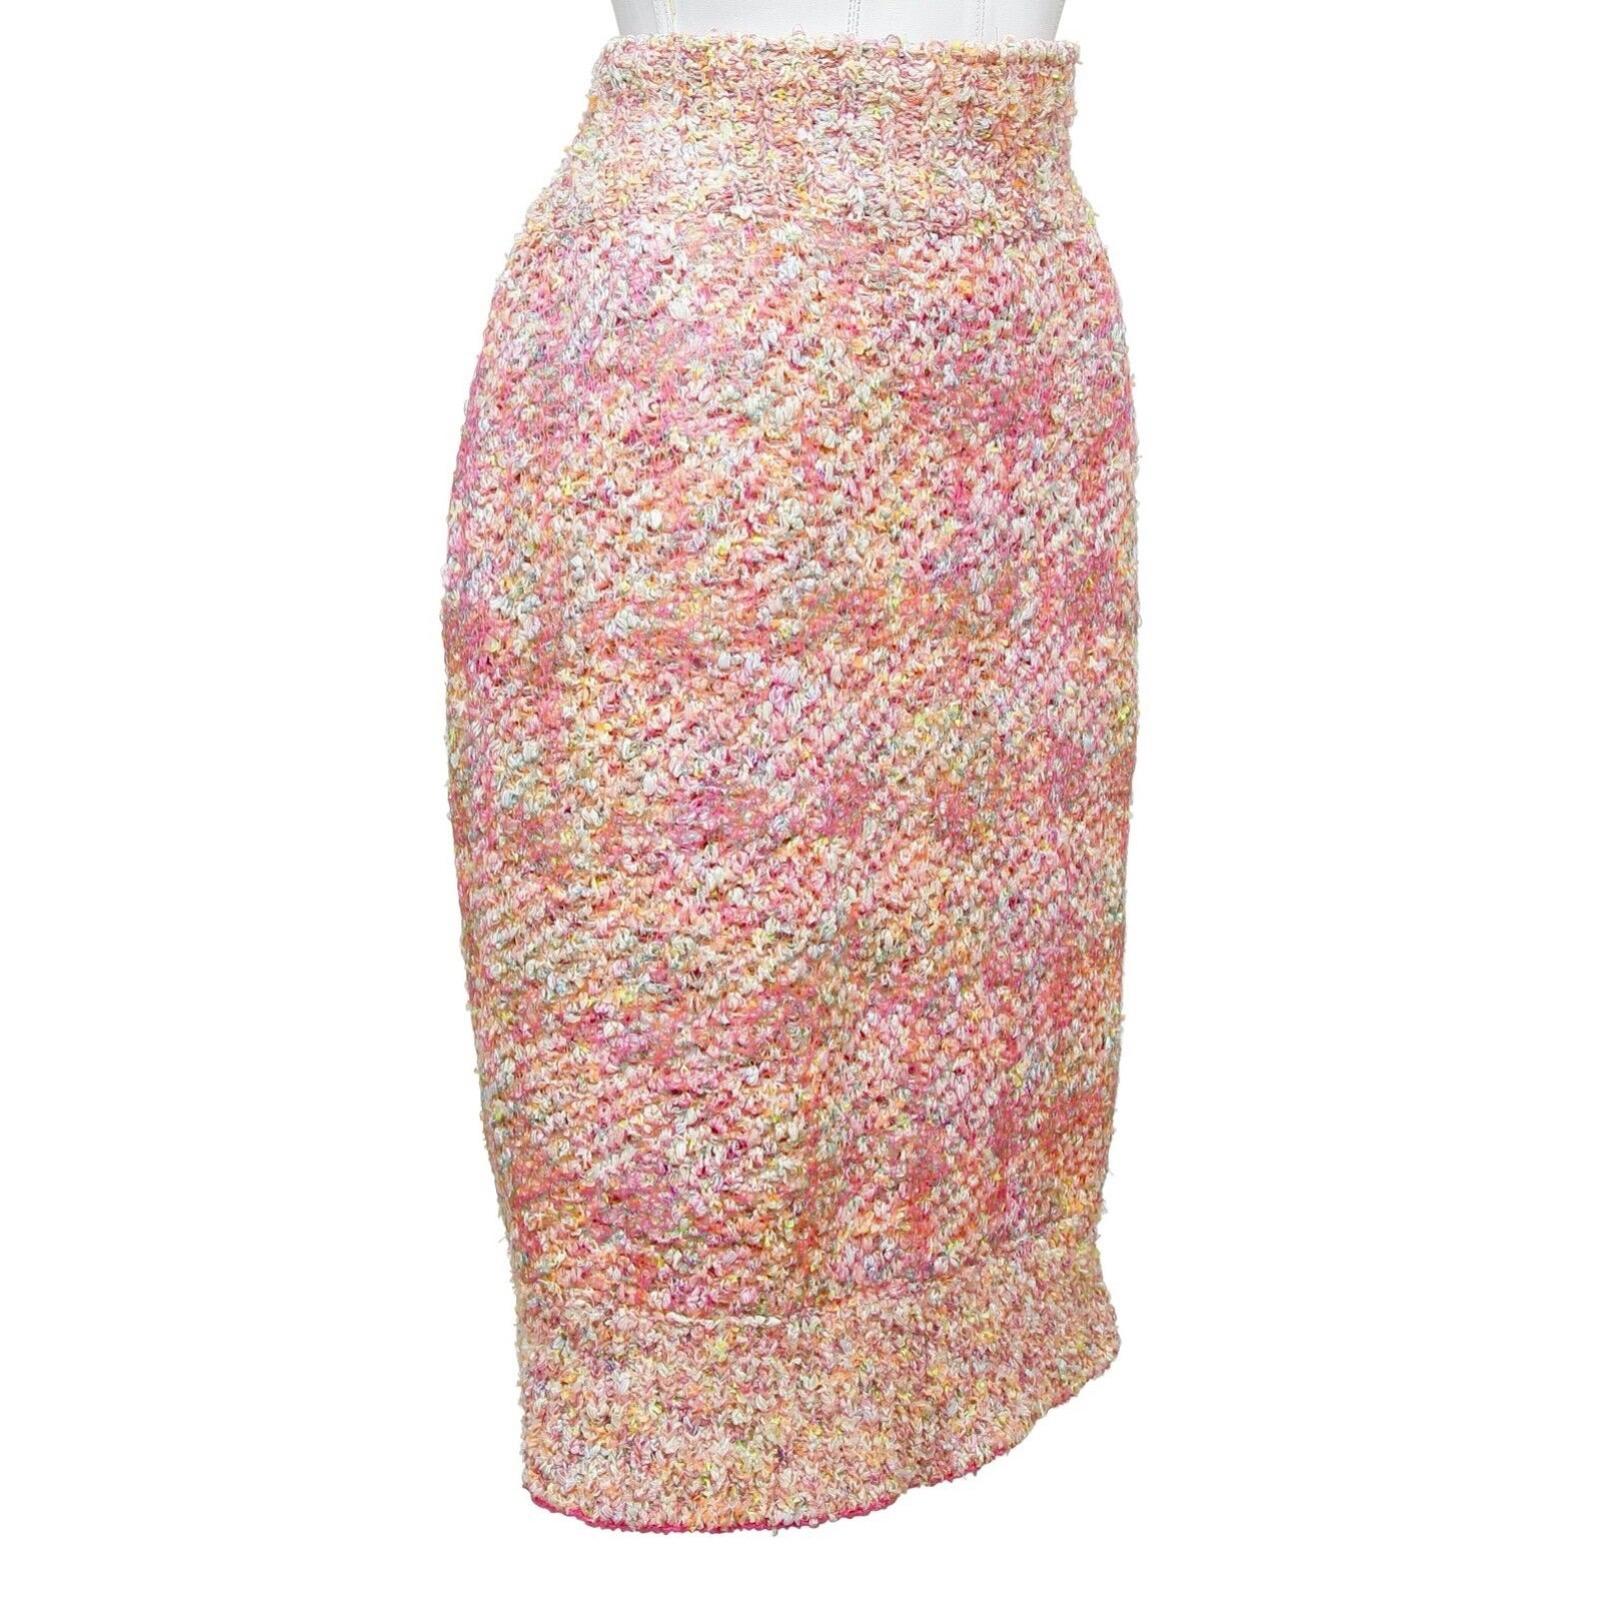 GUARANTEED AUTHENTIC CHANEL PINK FANTASY HIGH WAISTED SKIRT

Design:
- Fantasy knit tweed skirt in shades of pink with iridescent threading.
- High waisted.
- Side concealed zipper.
- Chanel plaque at left hip.
- Lined.

Fabric: 64% Polyamide, 35%